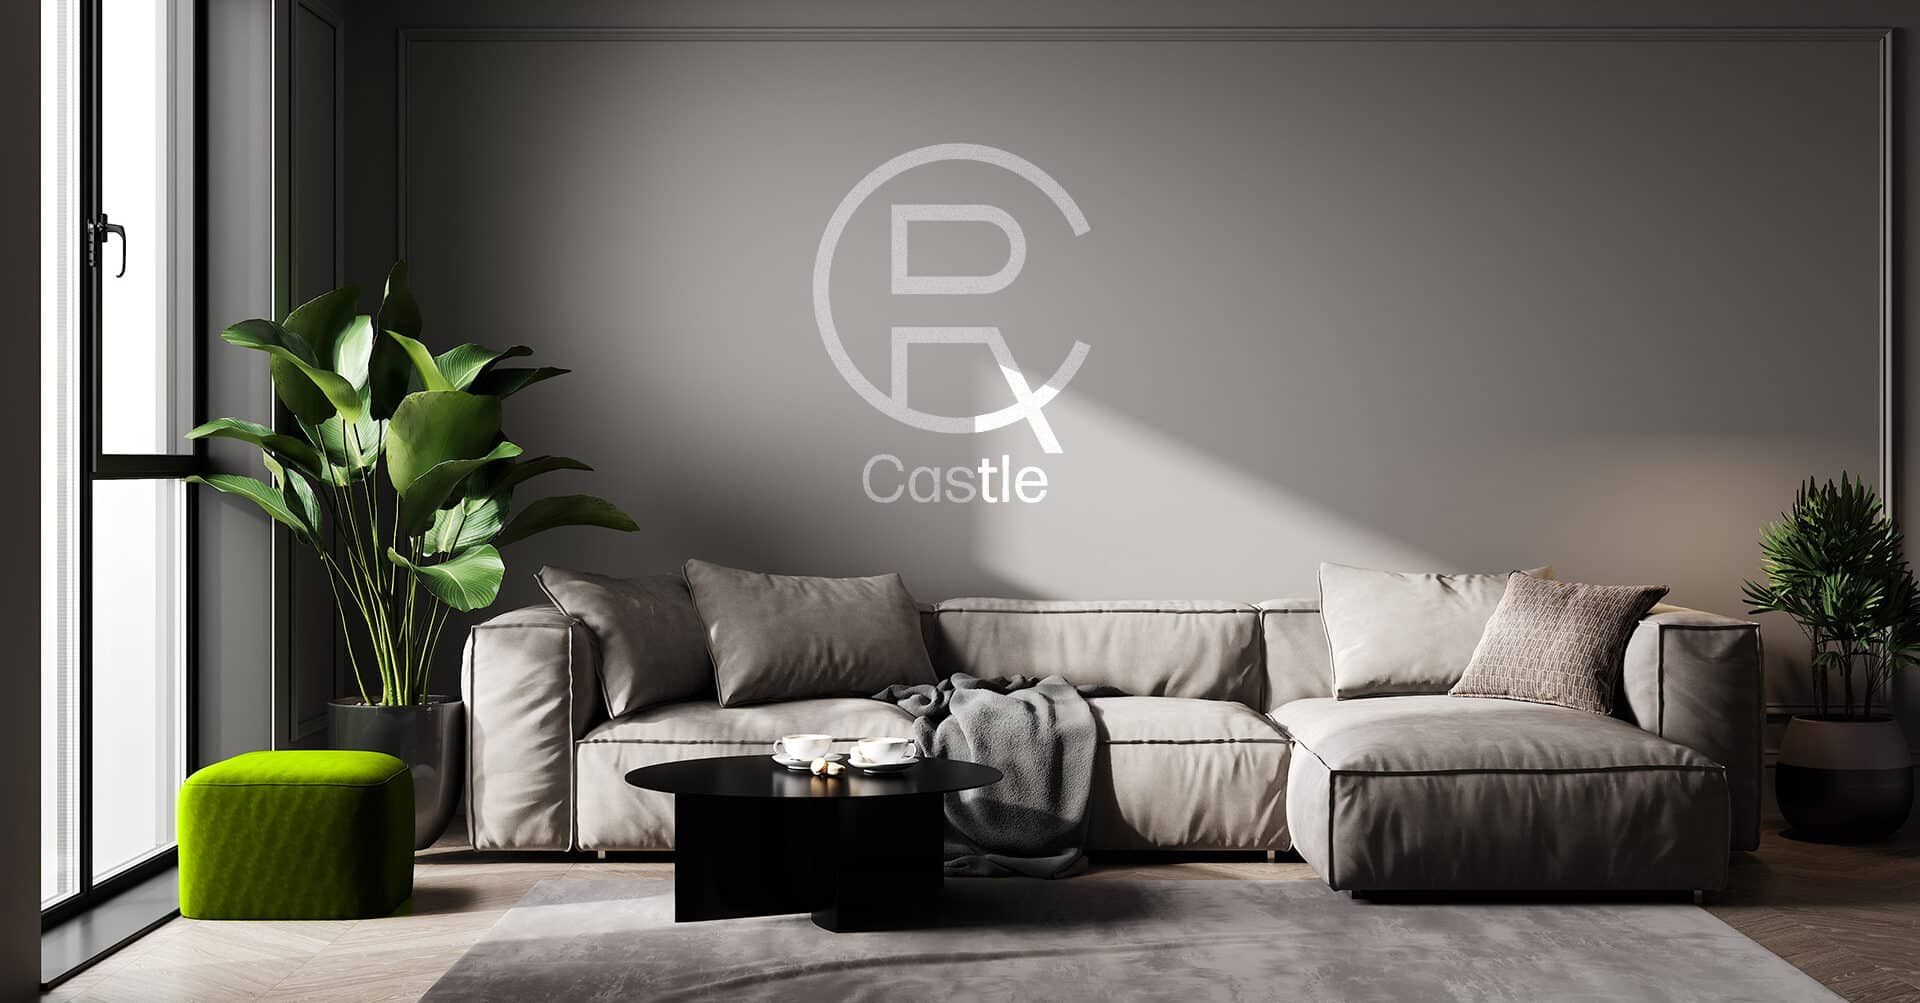 <span style="text-align: center;" class="block text-balance"><img class="block mx-auto" loading="lazy" decoding="async" class="wp-image-8068 aligncenter" src="https://www.castleresidential.co.uk/wp-content/uploads/2023/07/logo-300x277.png" alt="" width="109" height="98" /><span  class="block text-balance">Moving house is one of the <span style="text-decoration: underline; text-decoration-color: #9dea05;"><i>biggest</i></span> decisions we make</span></span>